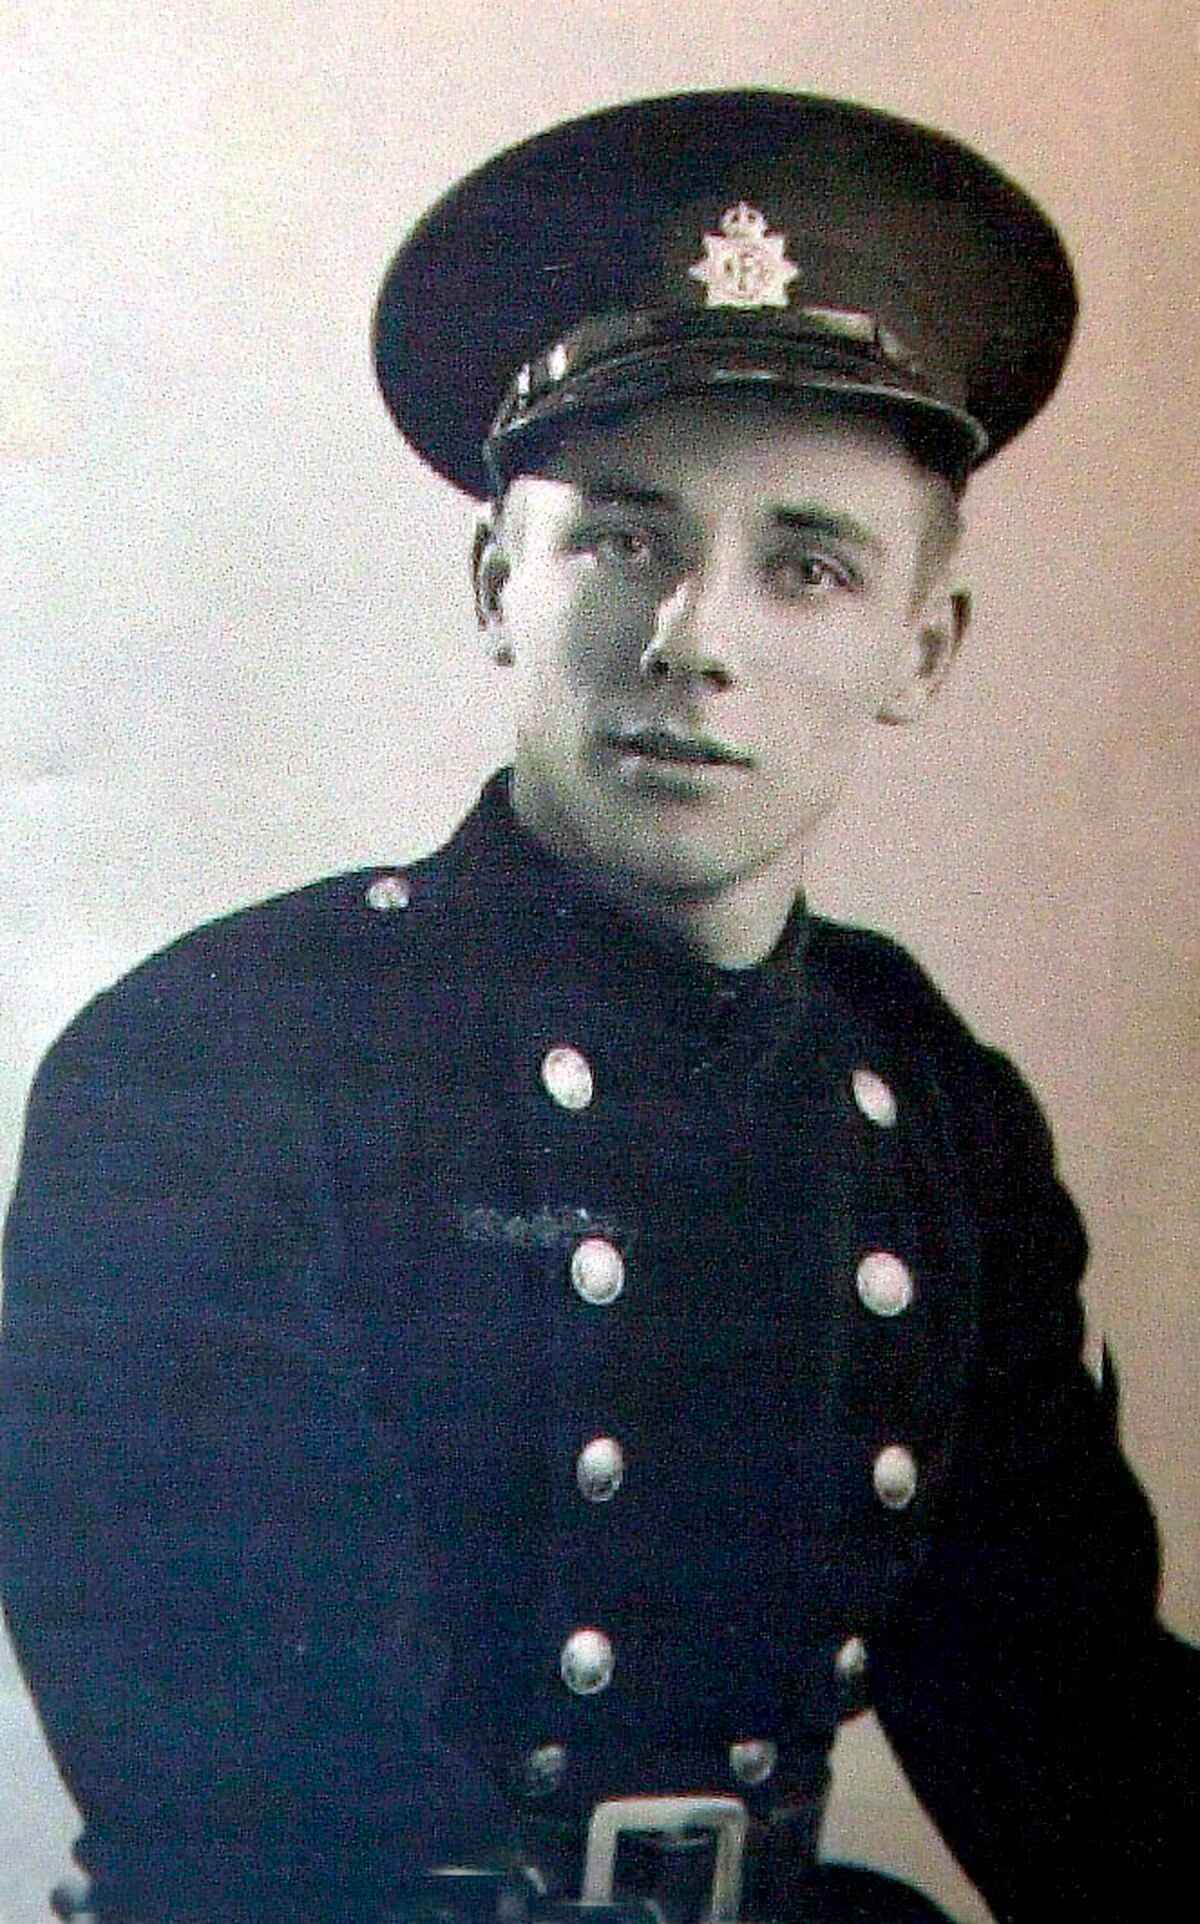 Geoff Ensor served as a boat officer with the Royal Marines in Normandy